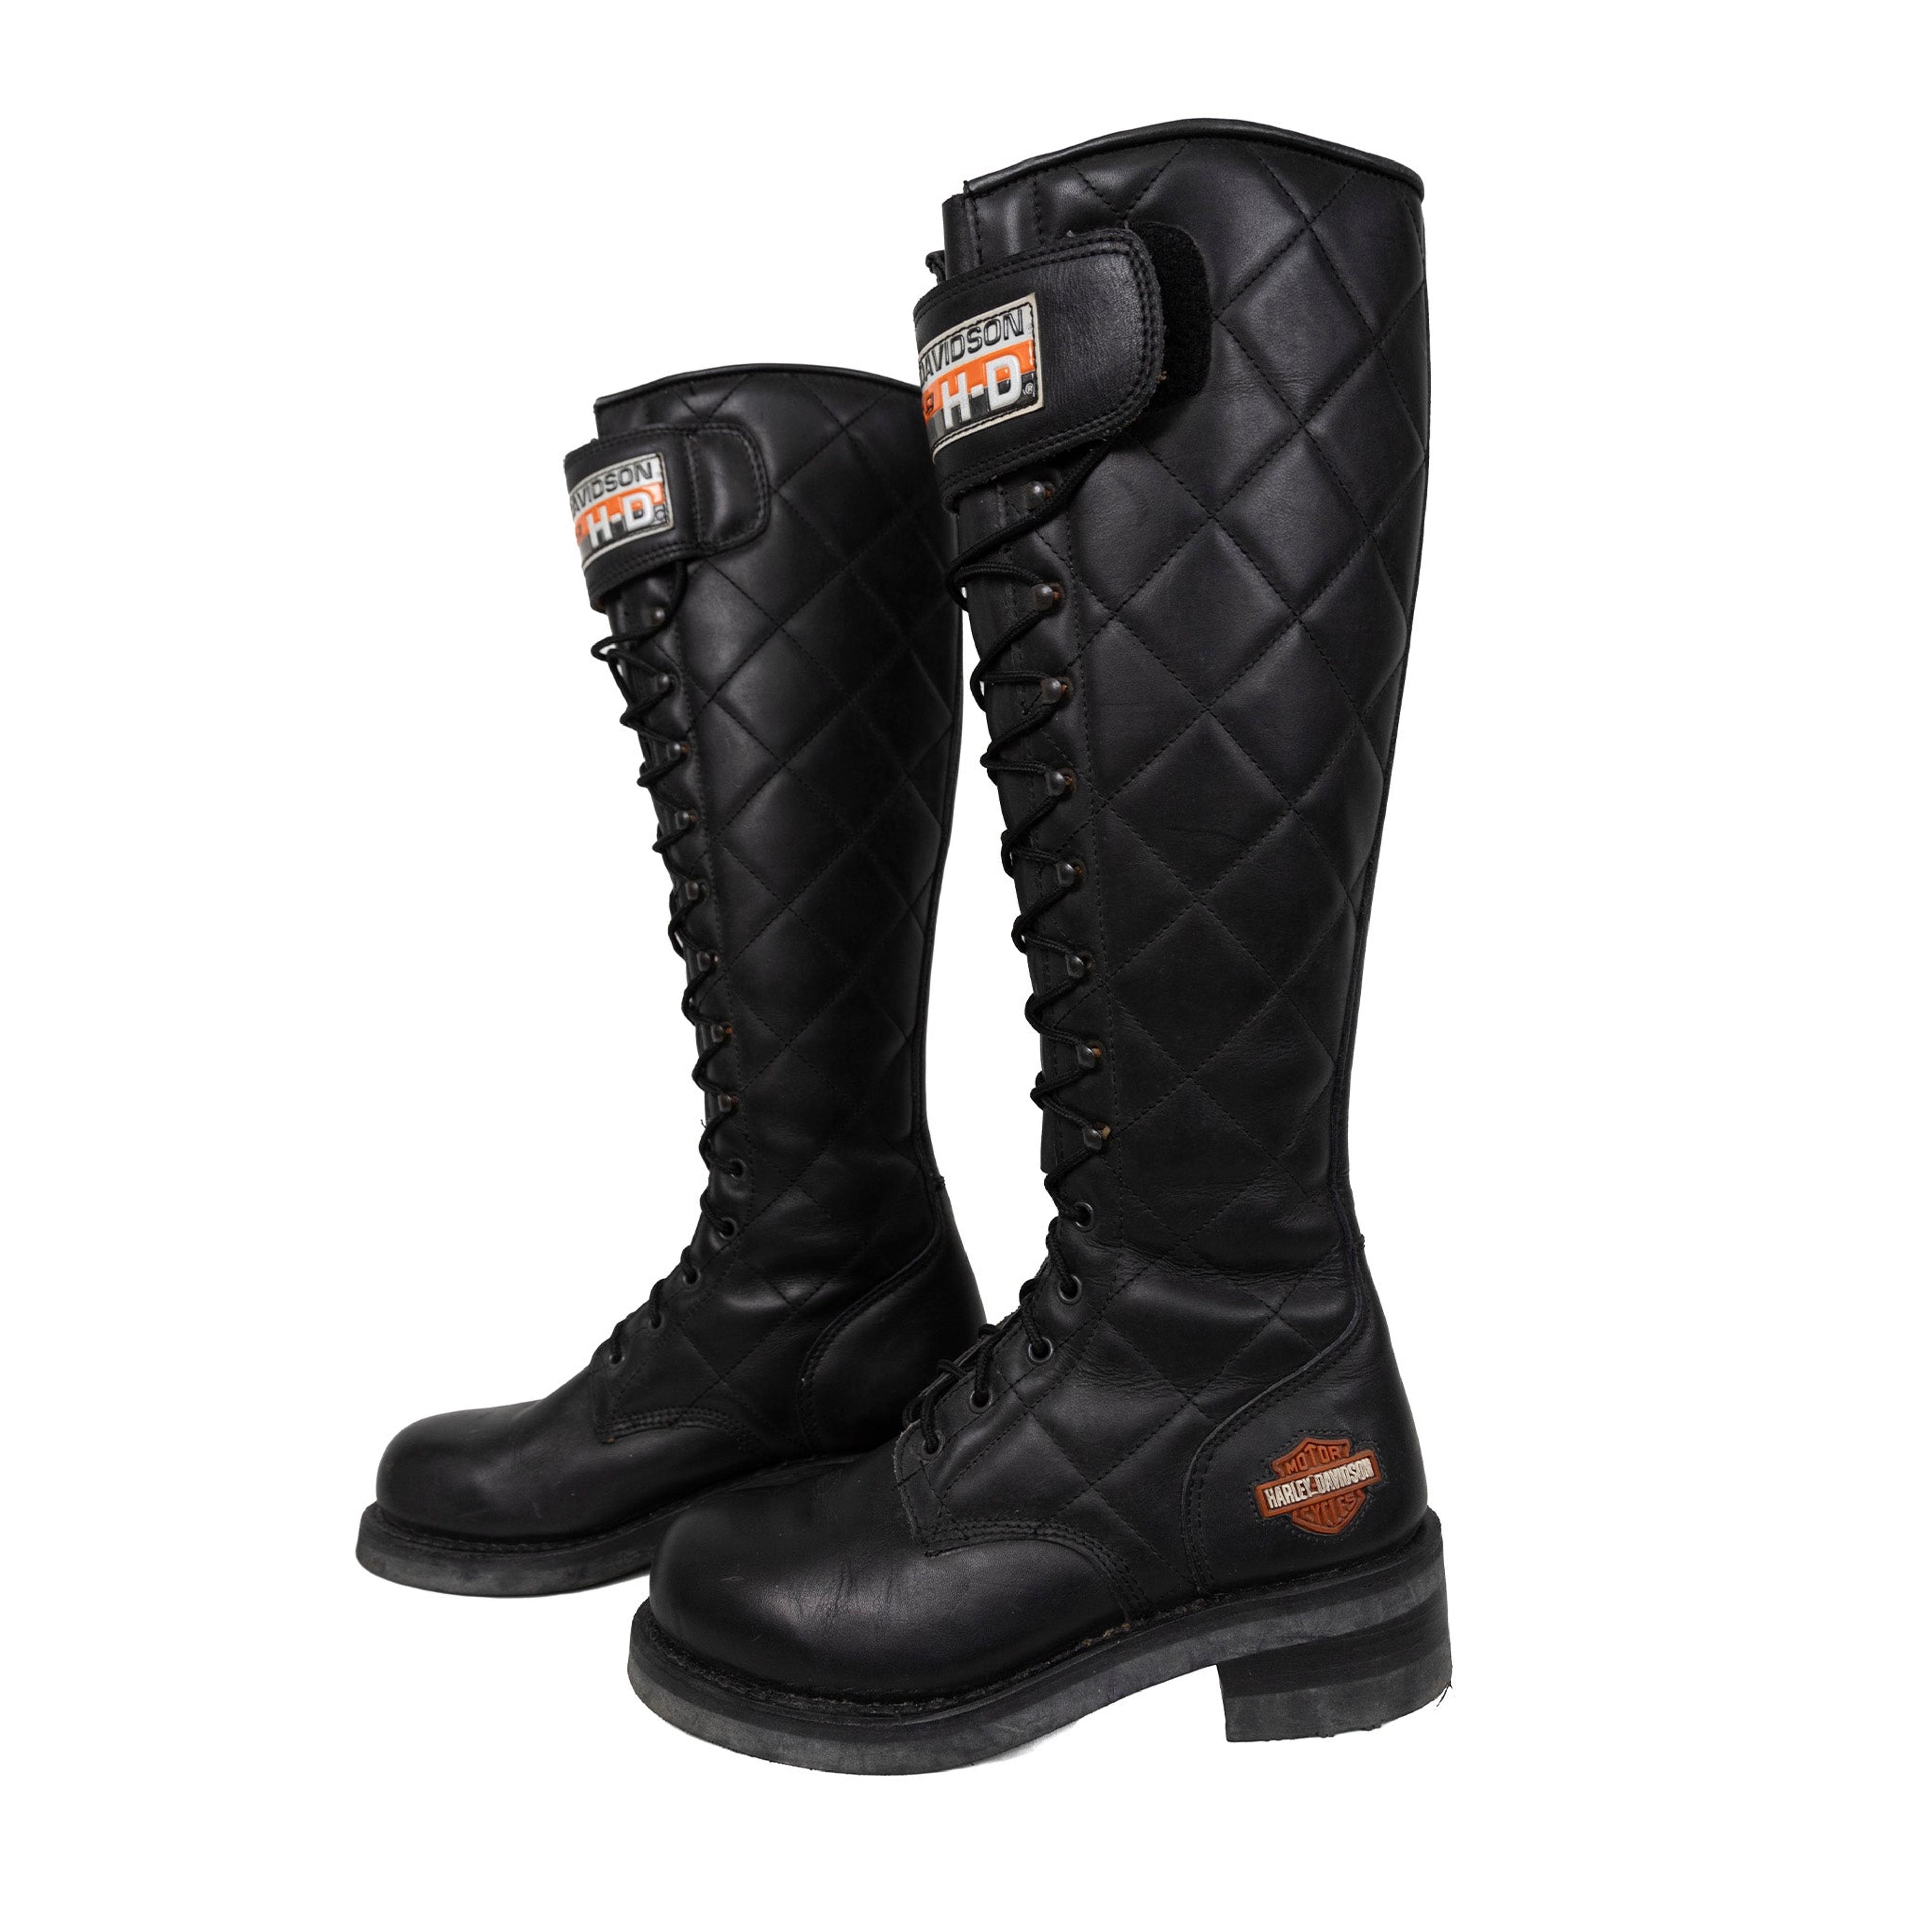 Alternate View 1 of Harley Davidson Racing XR750 Lace Up Biker Boots